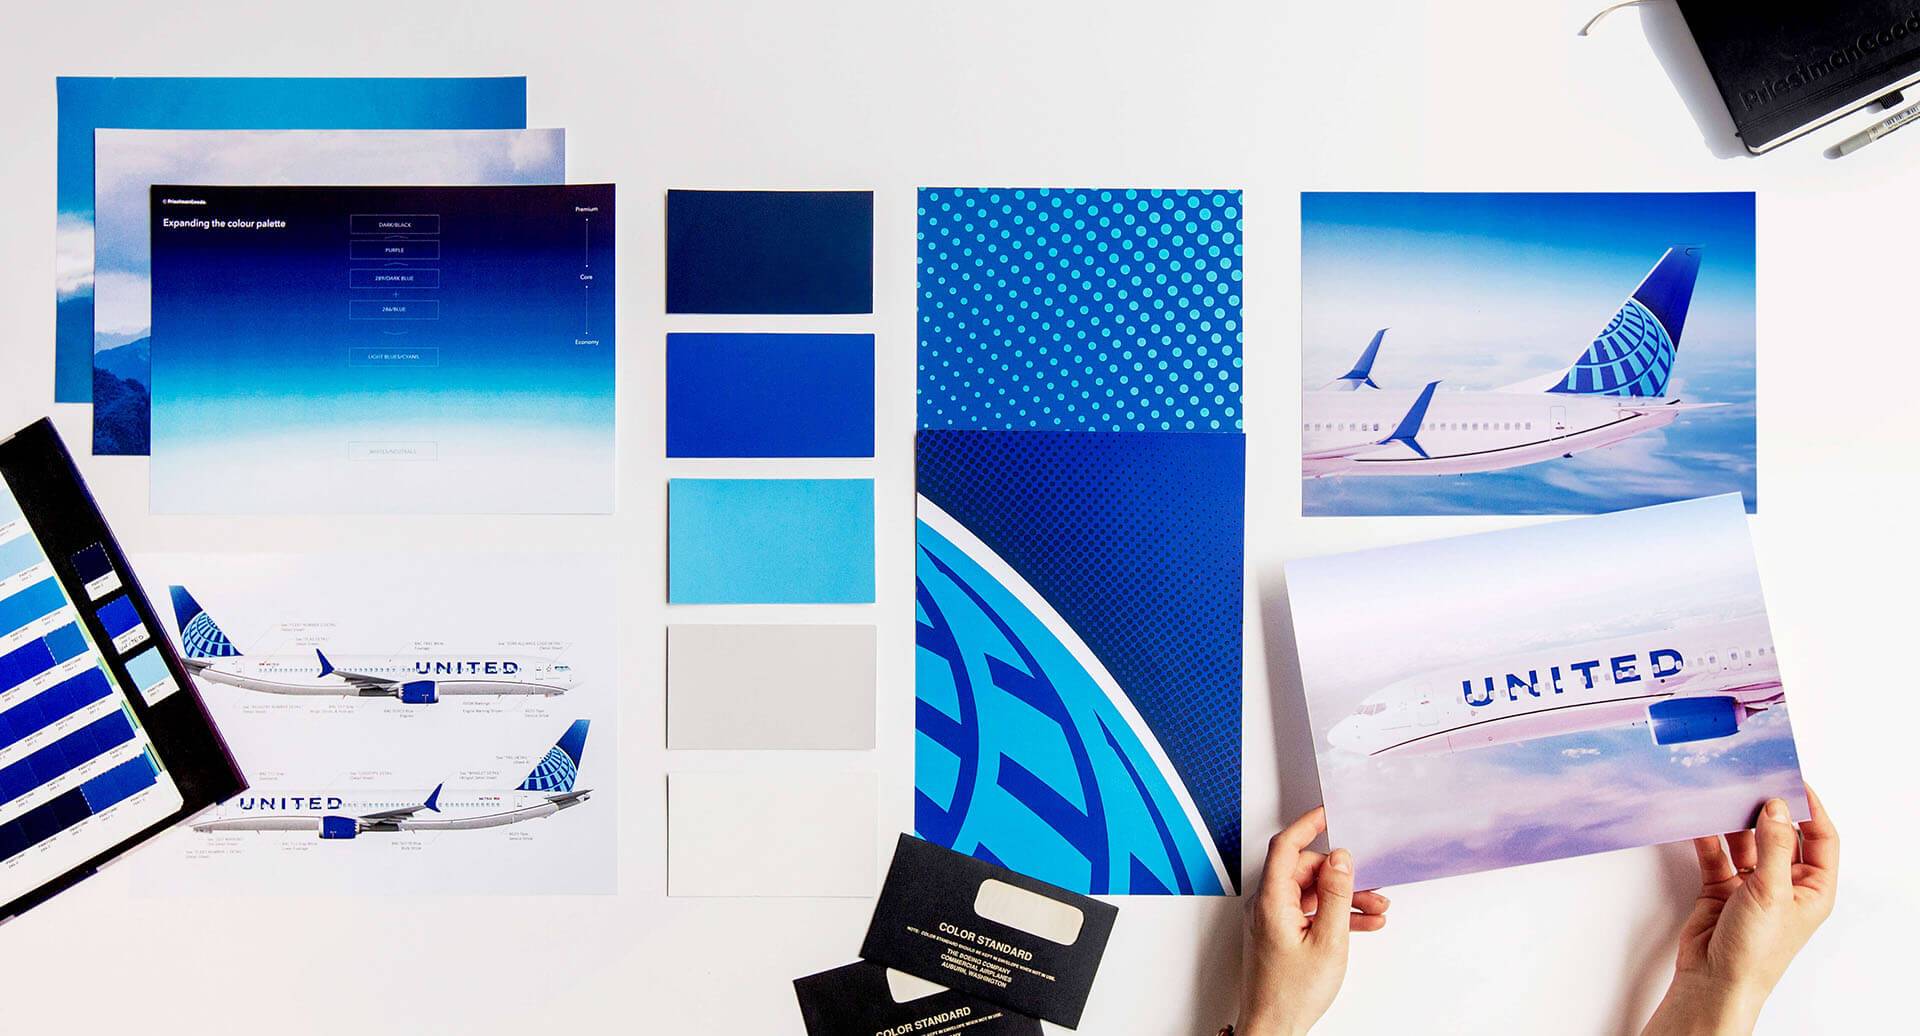 United Airlines brand colours and pattern details